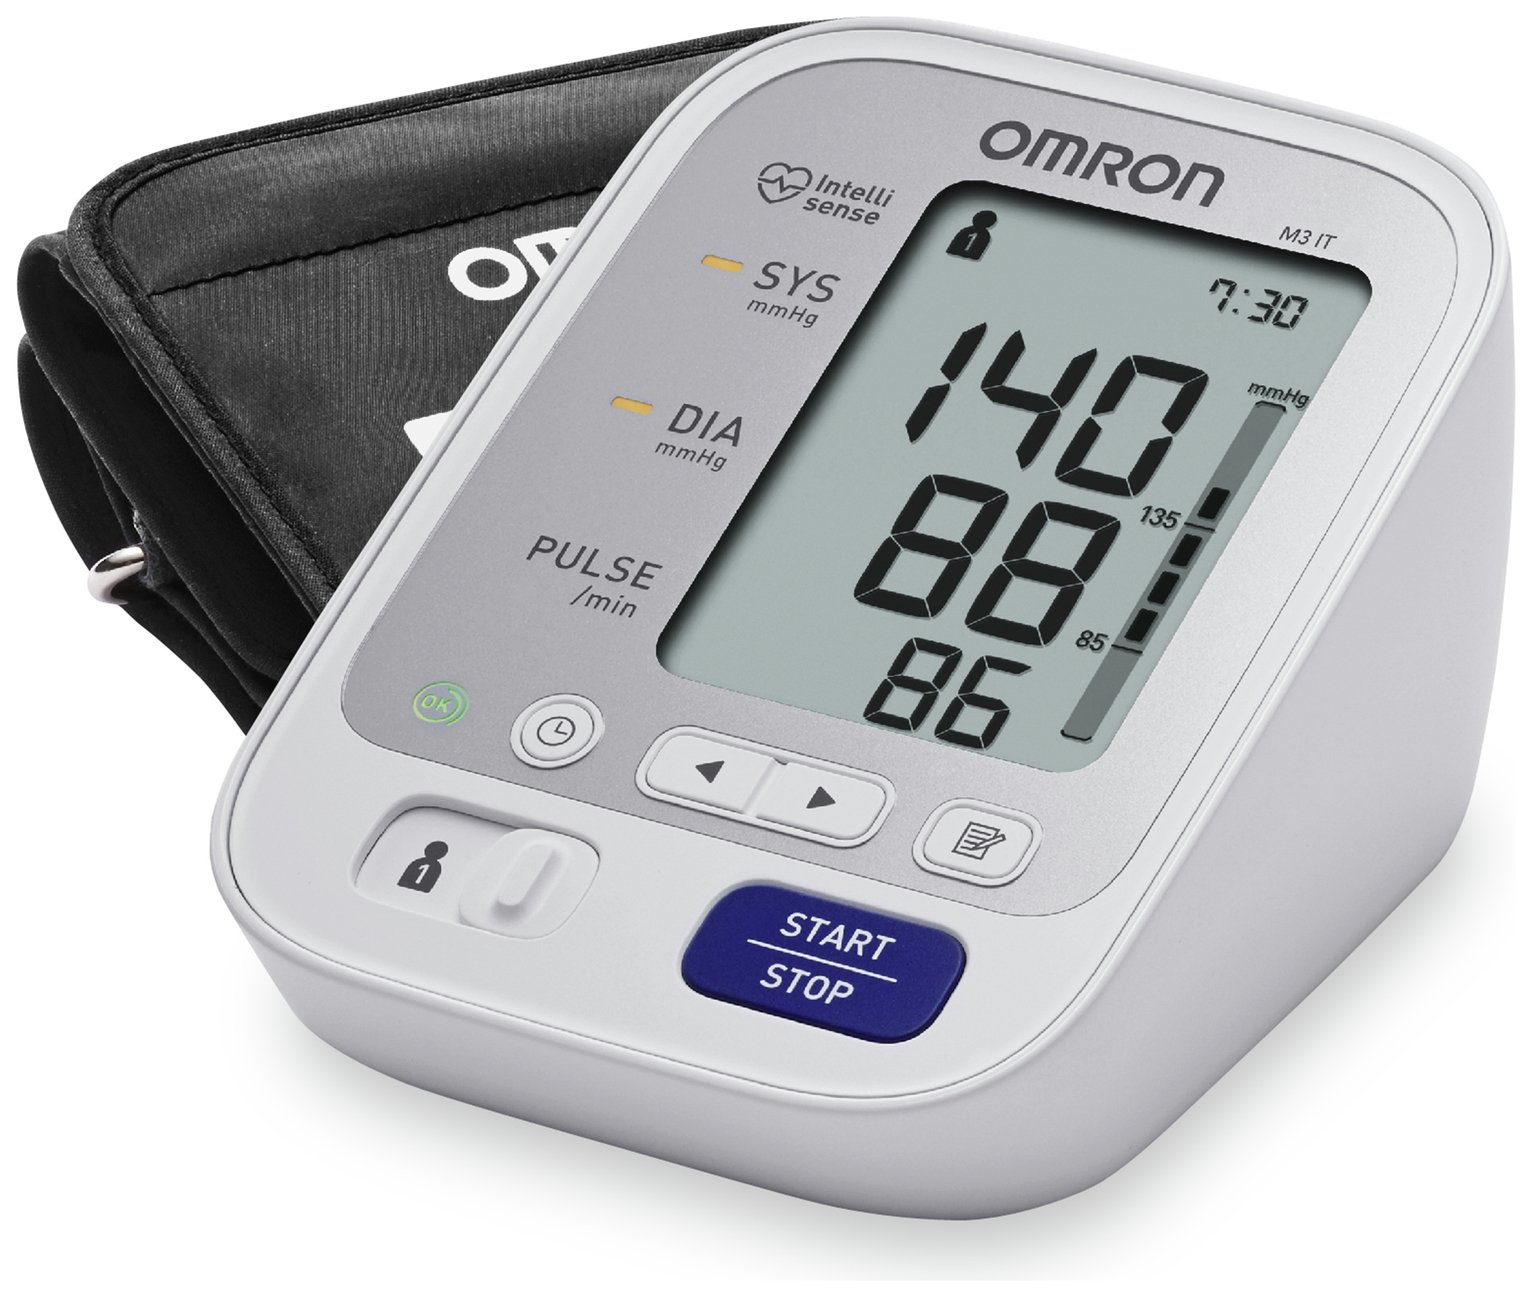 OMRON M3 Blood Pressure Monitor review